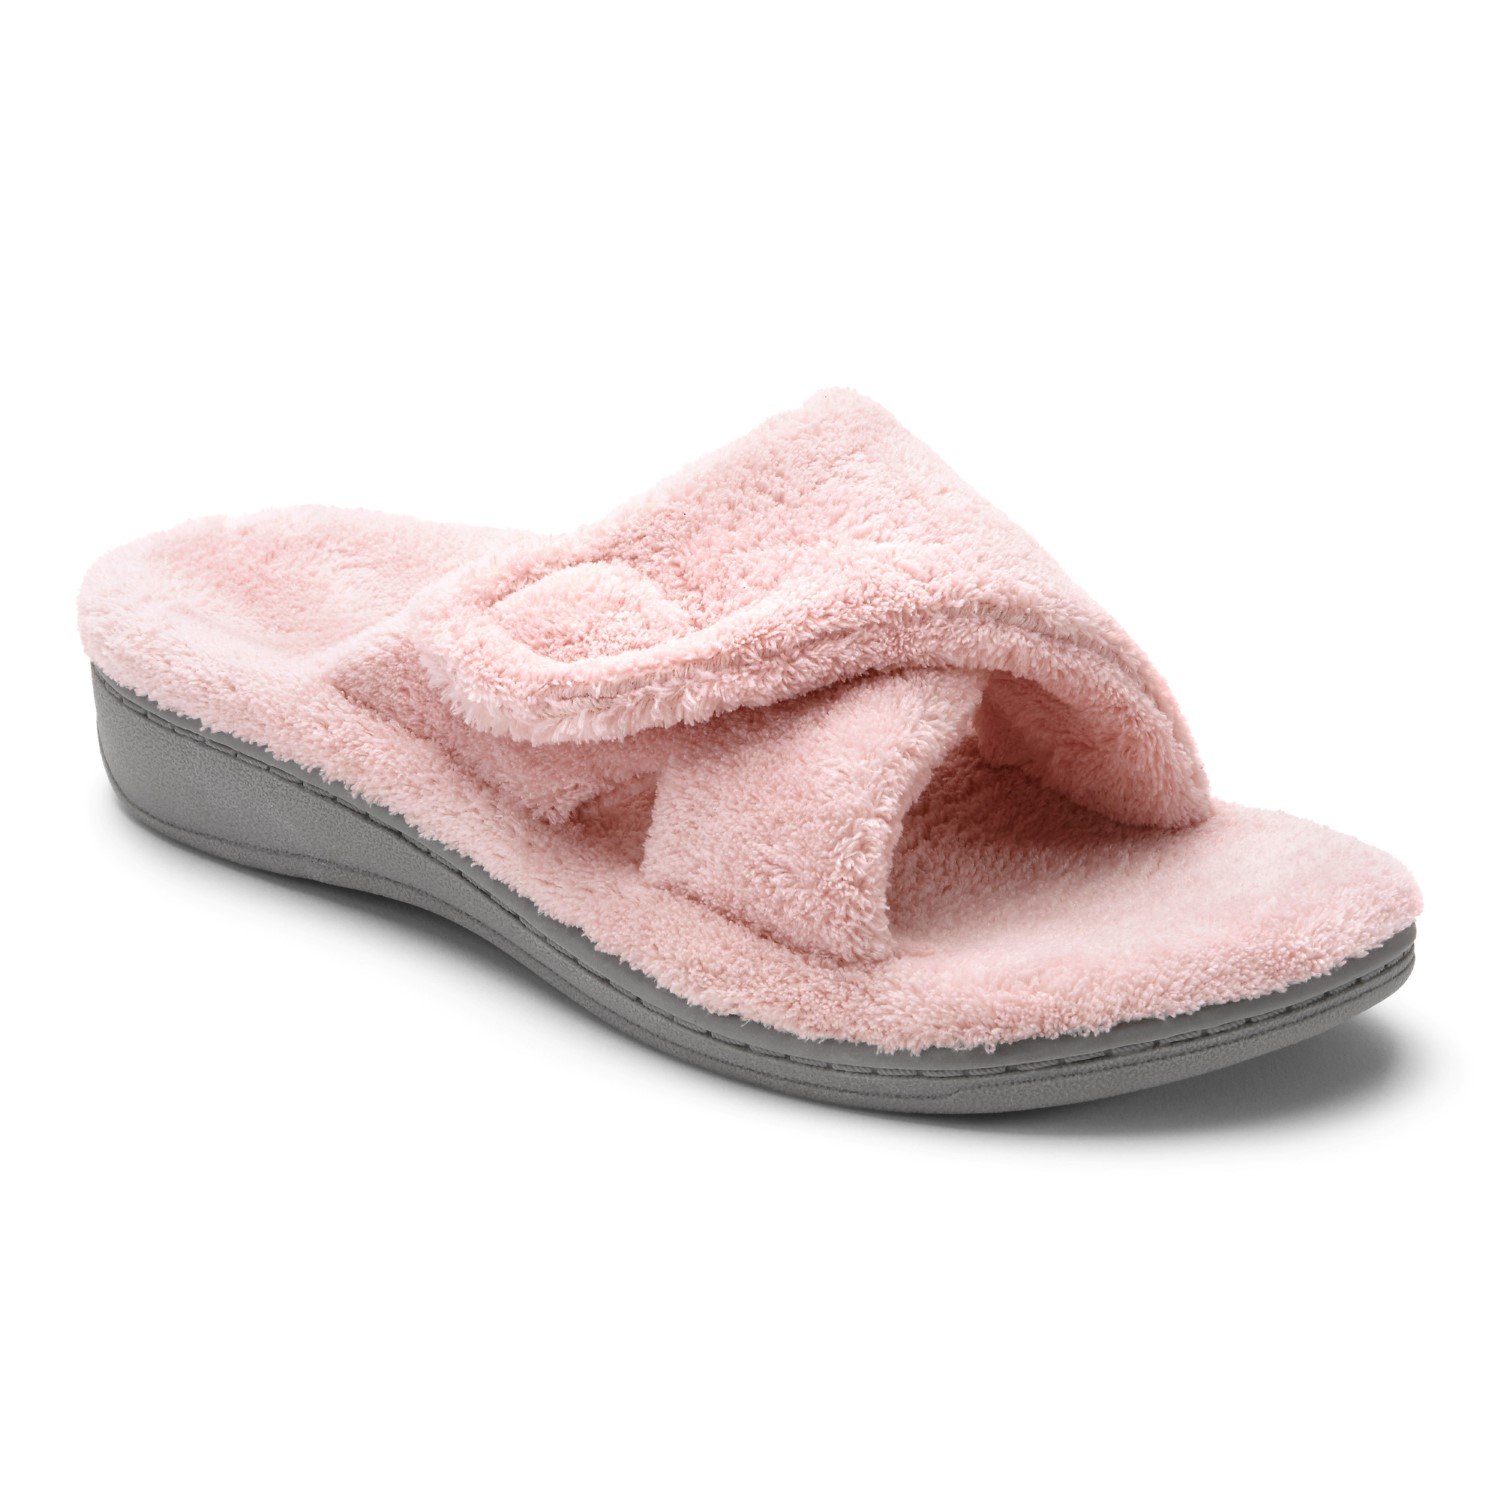 Vionic Relax Orthaheel Slippers for Women | Orthotic Shop